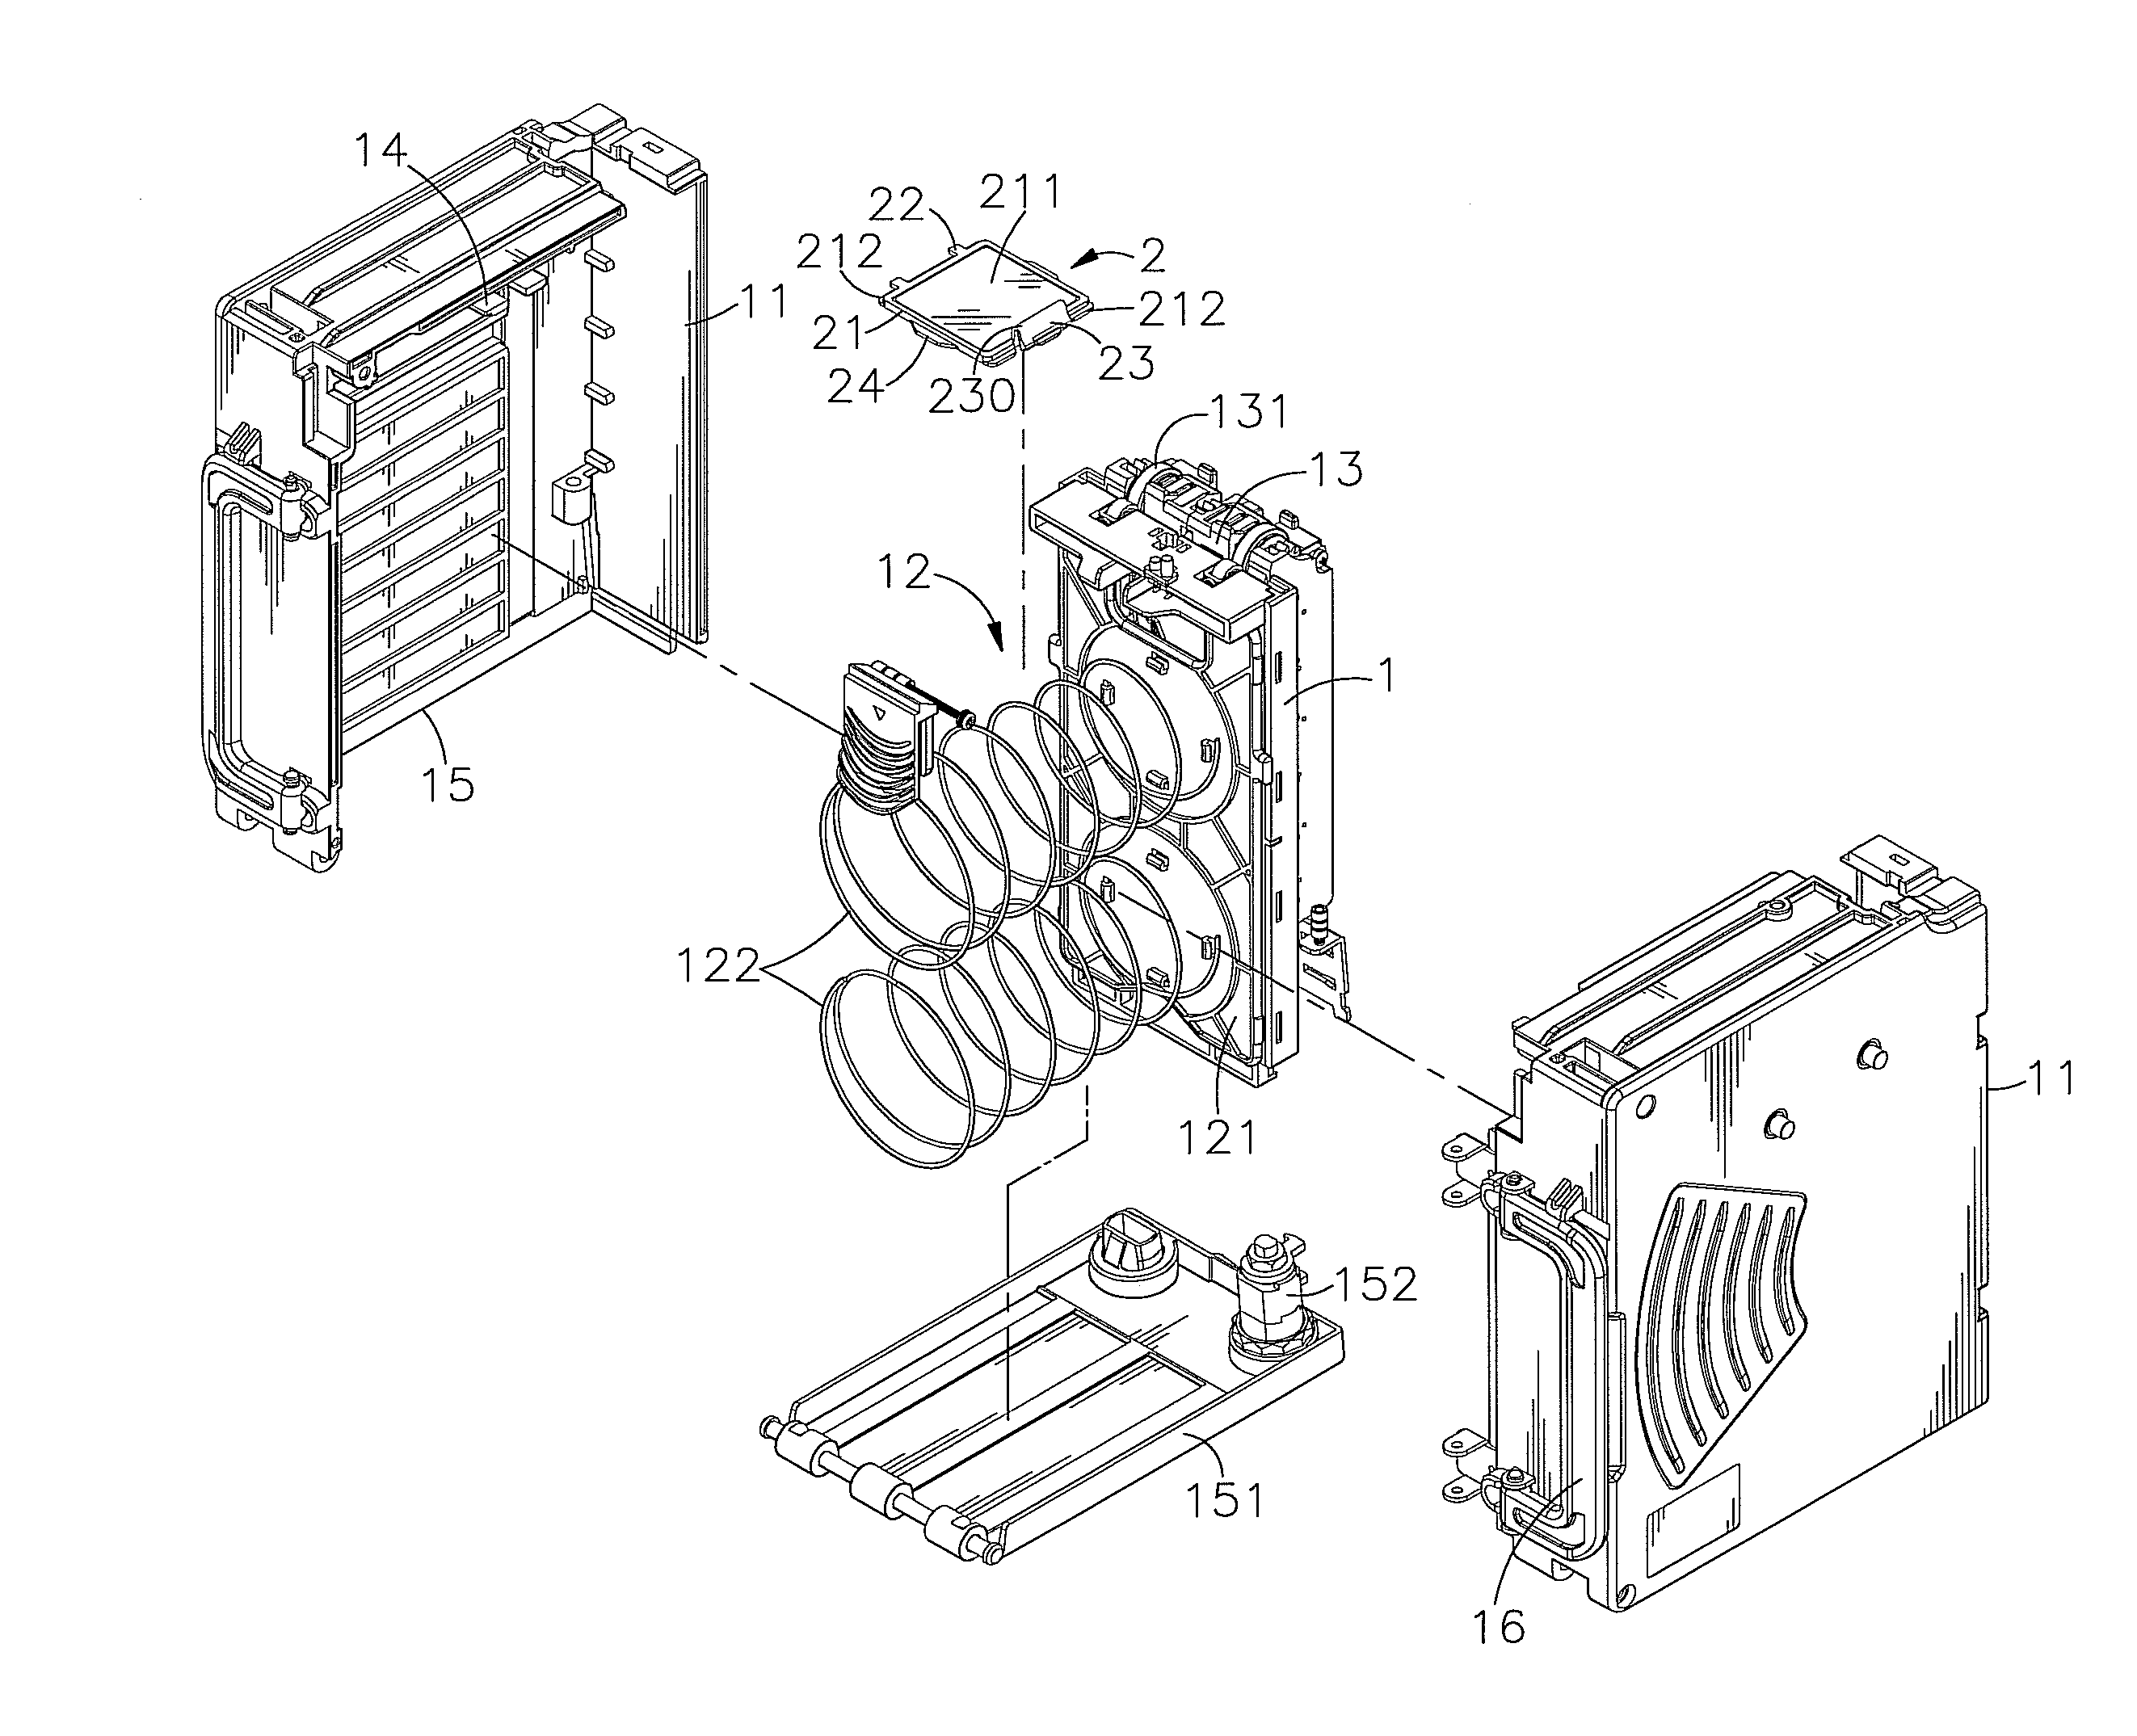 Bill box having a wireless memory function for use in a bill acceptor